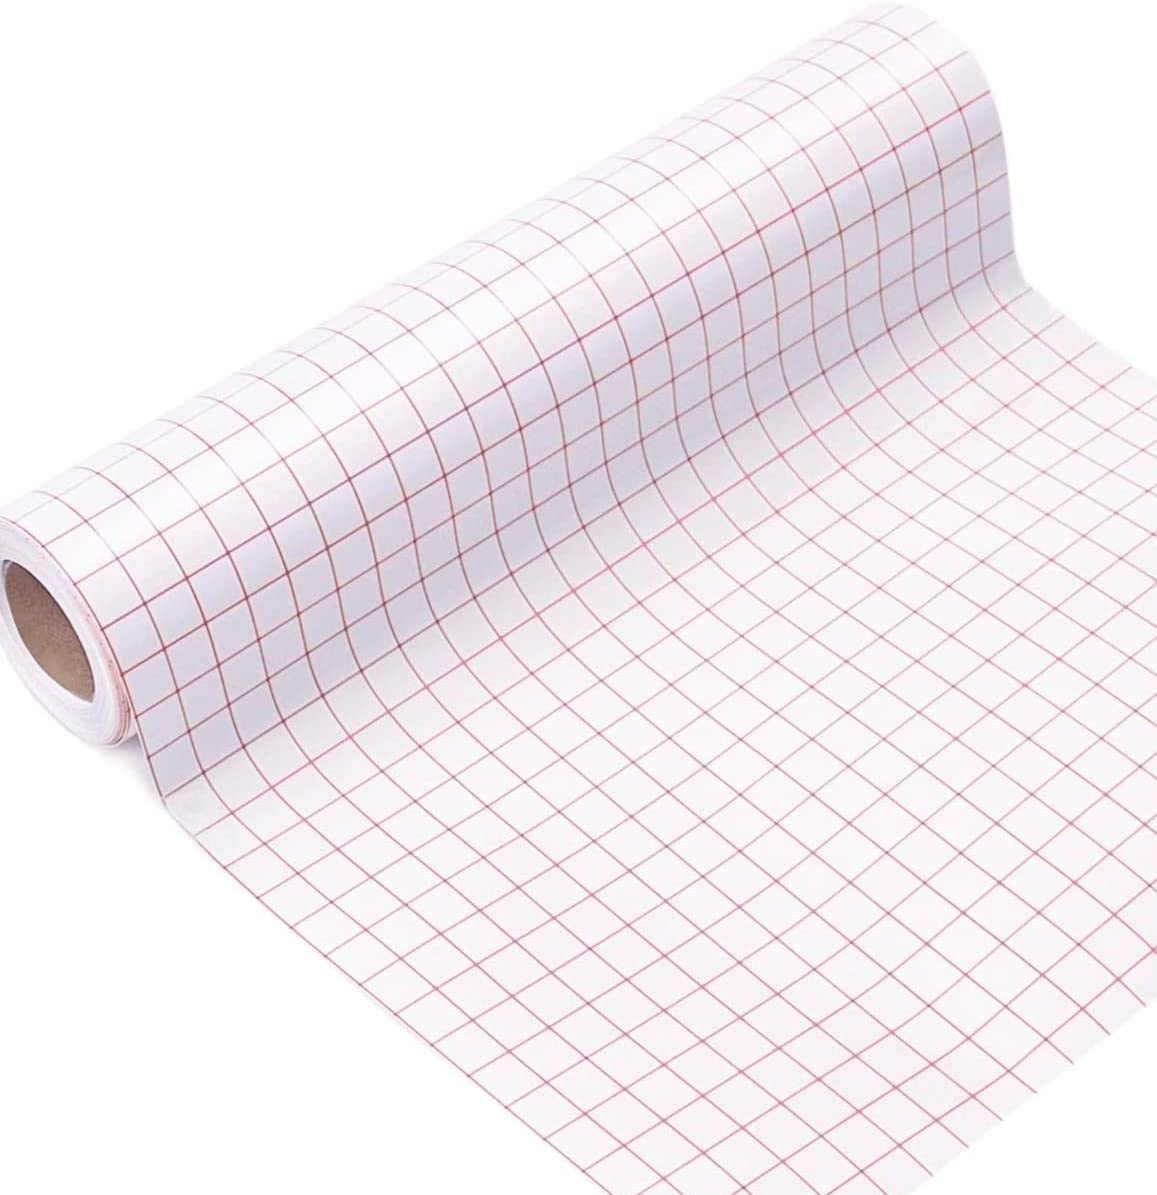 Clear Vinyl Transfer Paper Tape Roll 12x50FT Alignment Grid Application  Tape